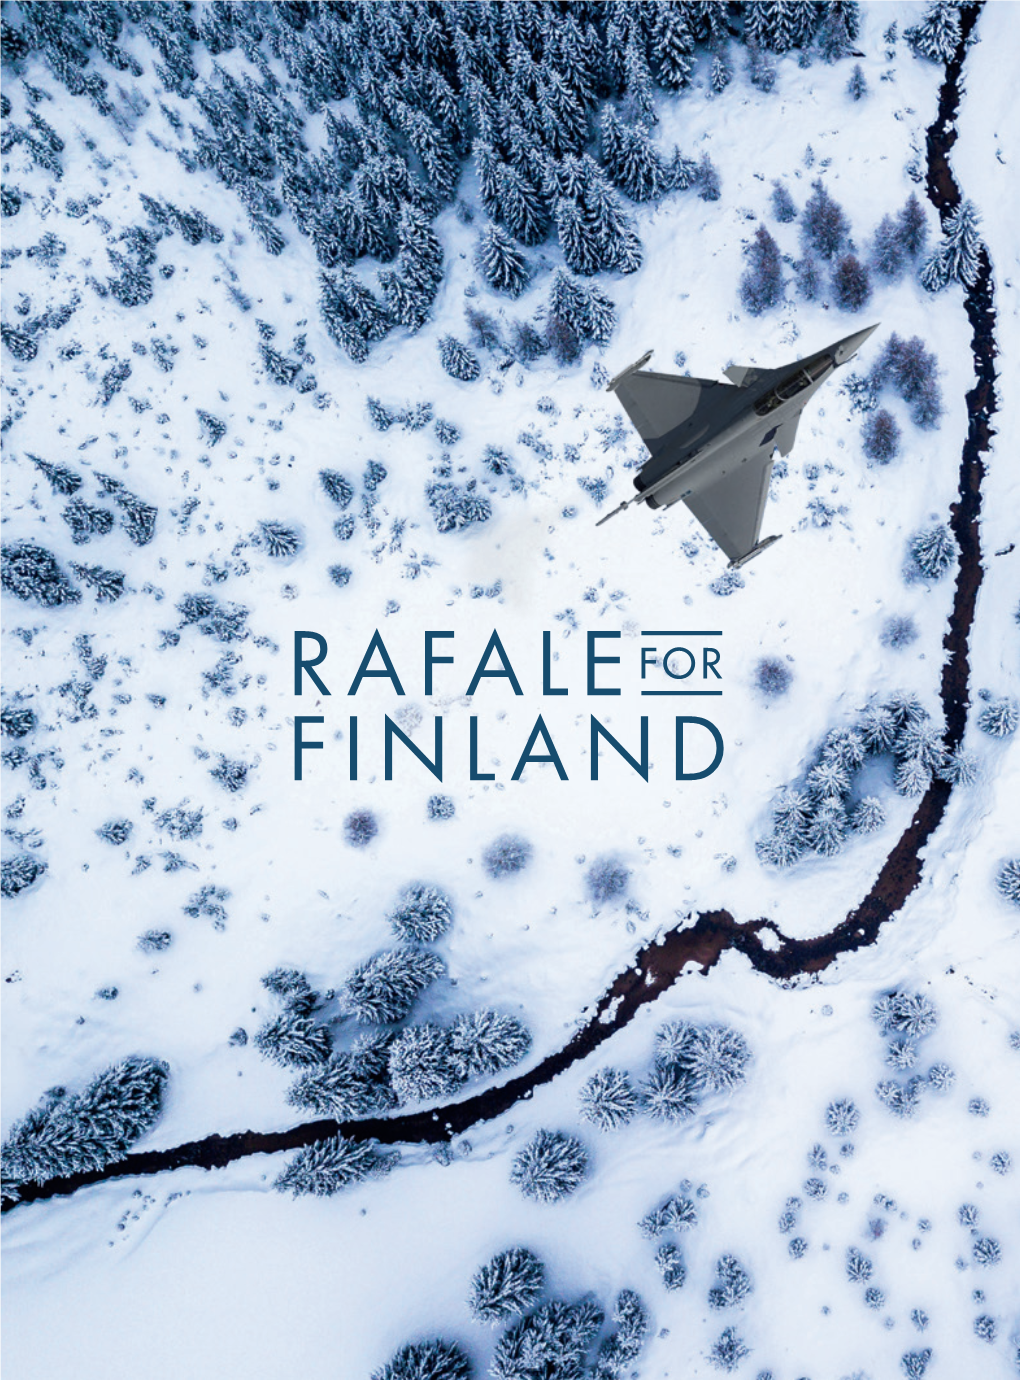 Rafale for Finland